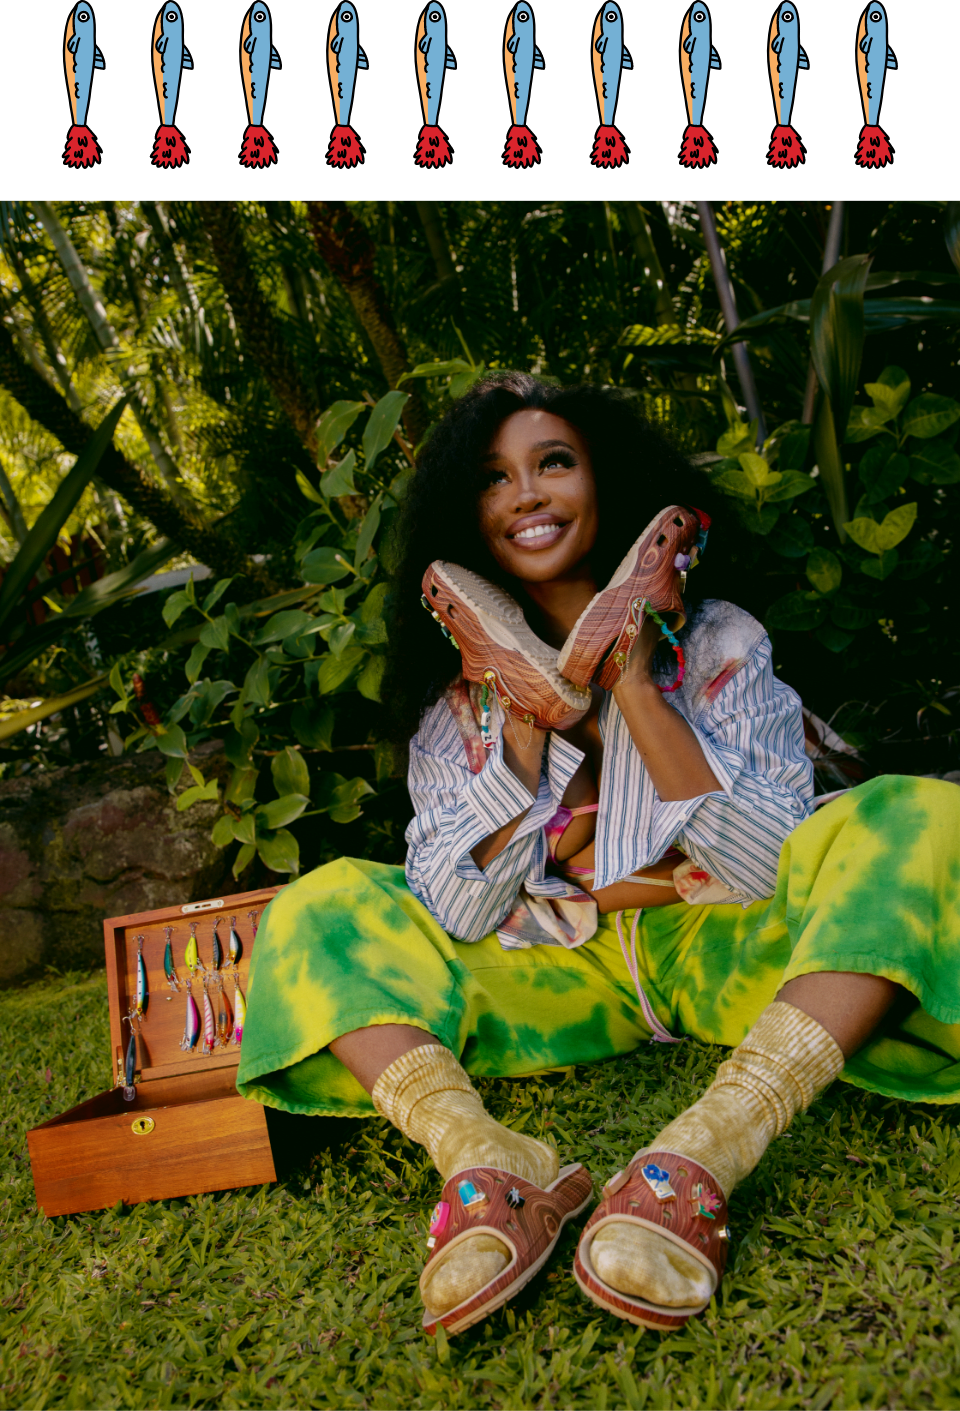 Fishing lure pop-art. Sza posing in natural setting wearing Wood Print Clogs on hands, and Wood Print Slides on Feet.